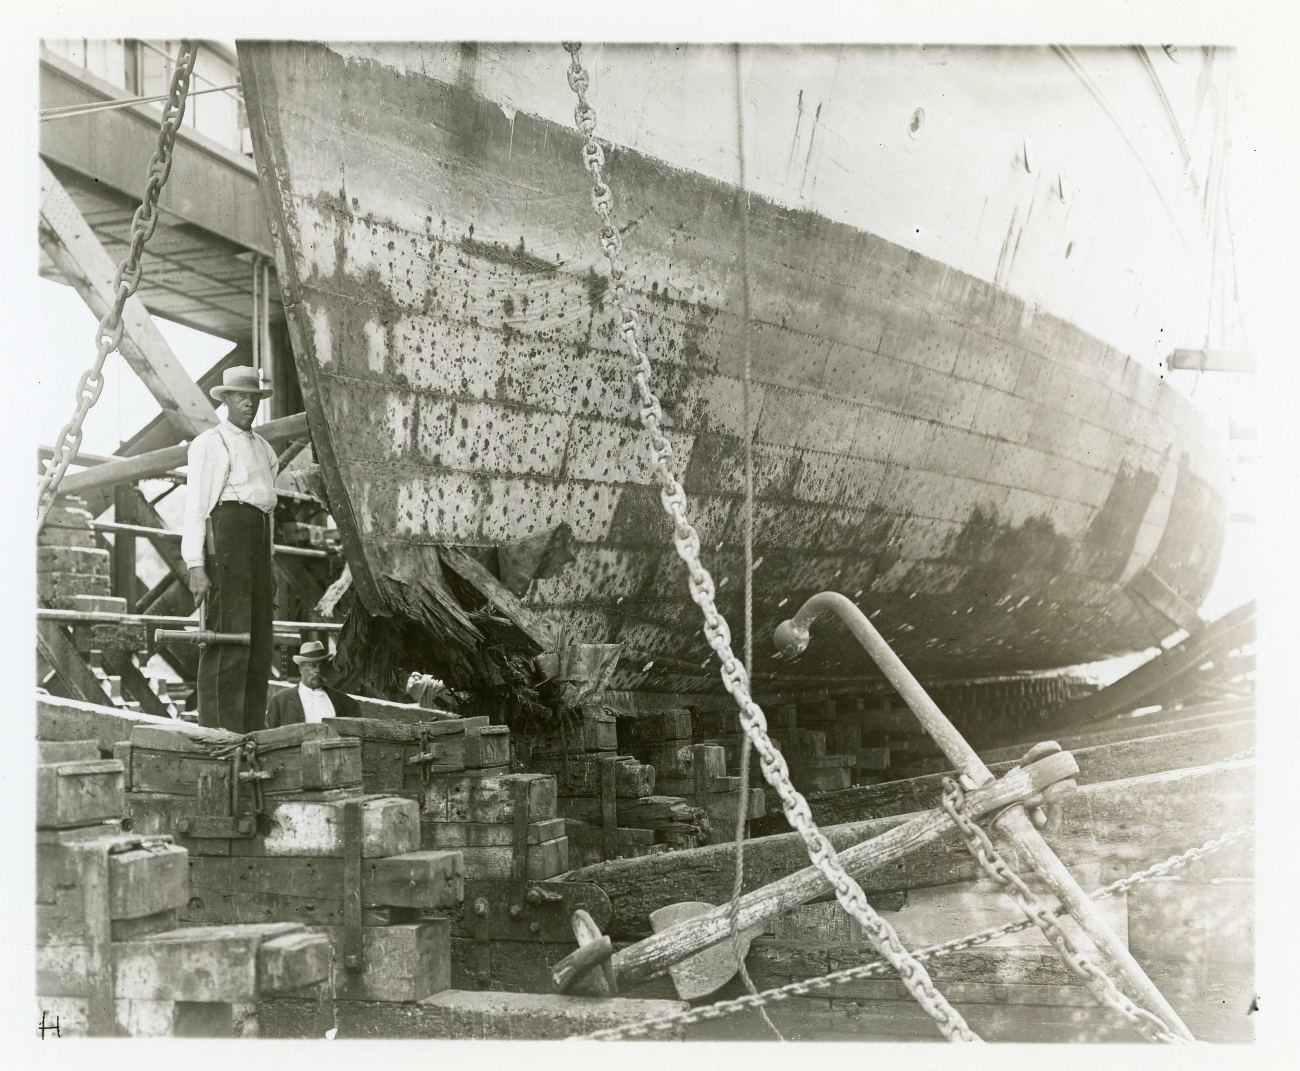 Bow of USC&GS; Ship BLAKE after encountering a hard object